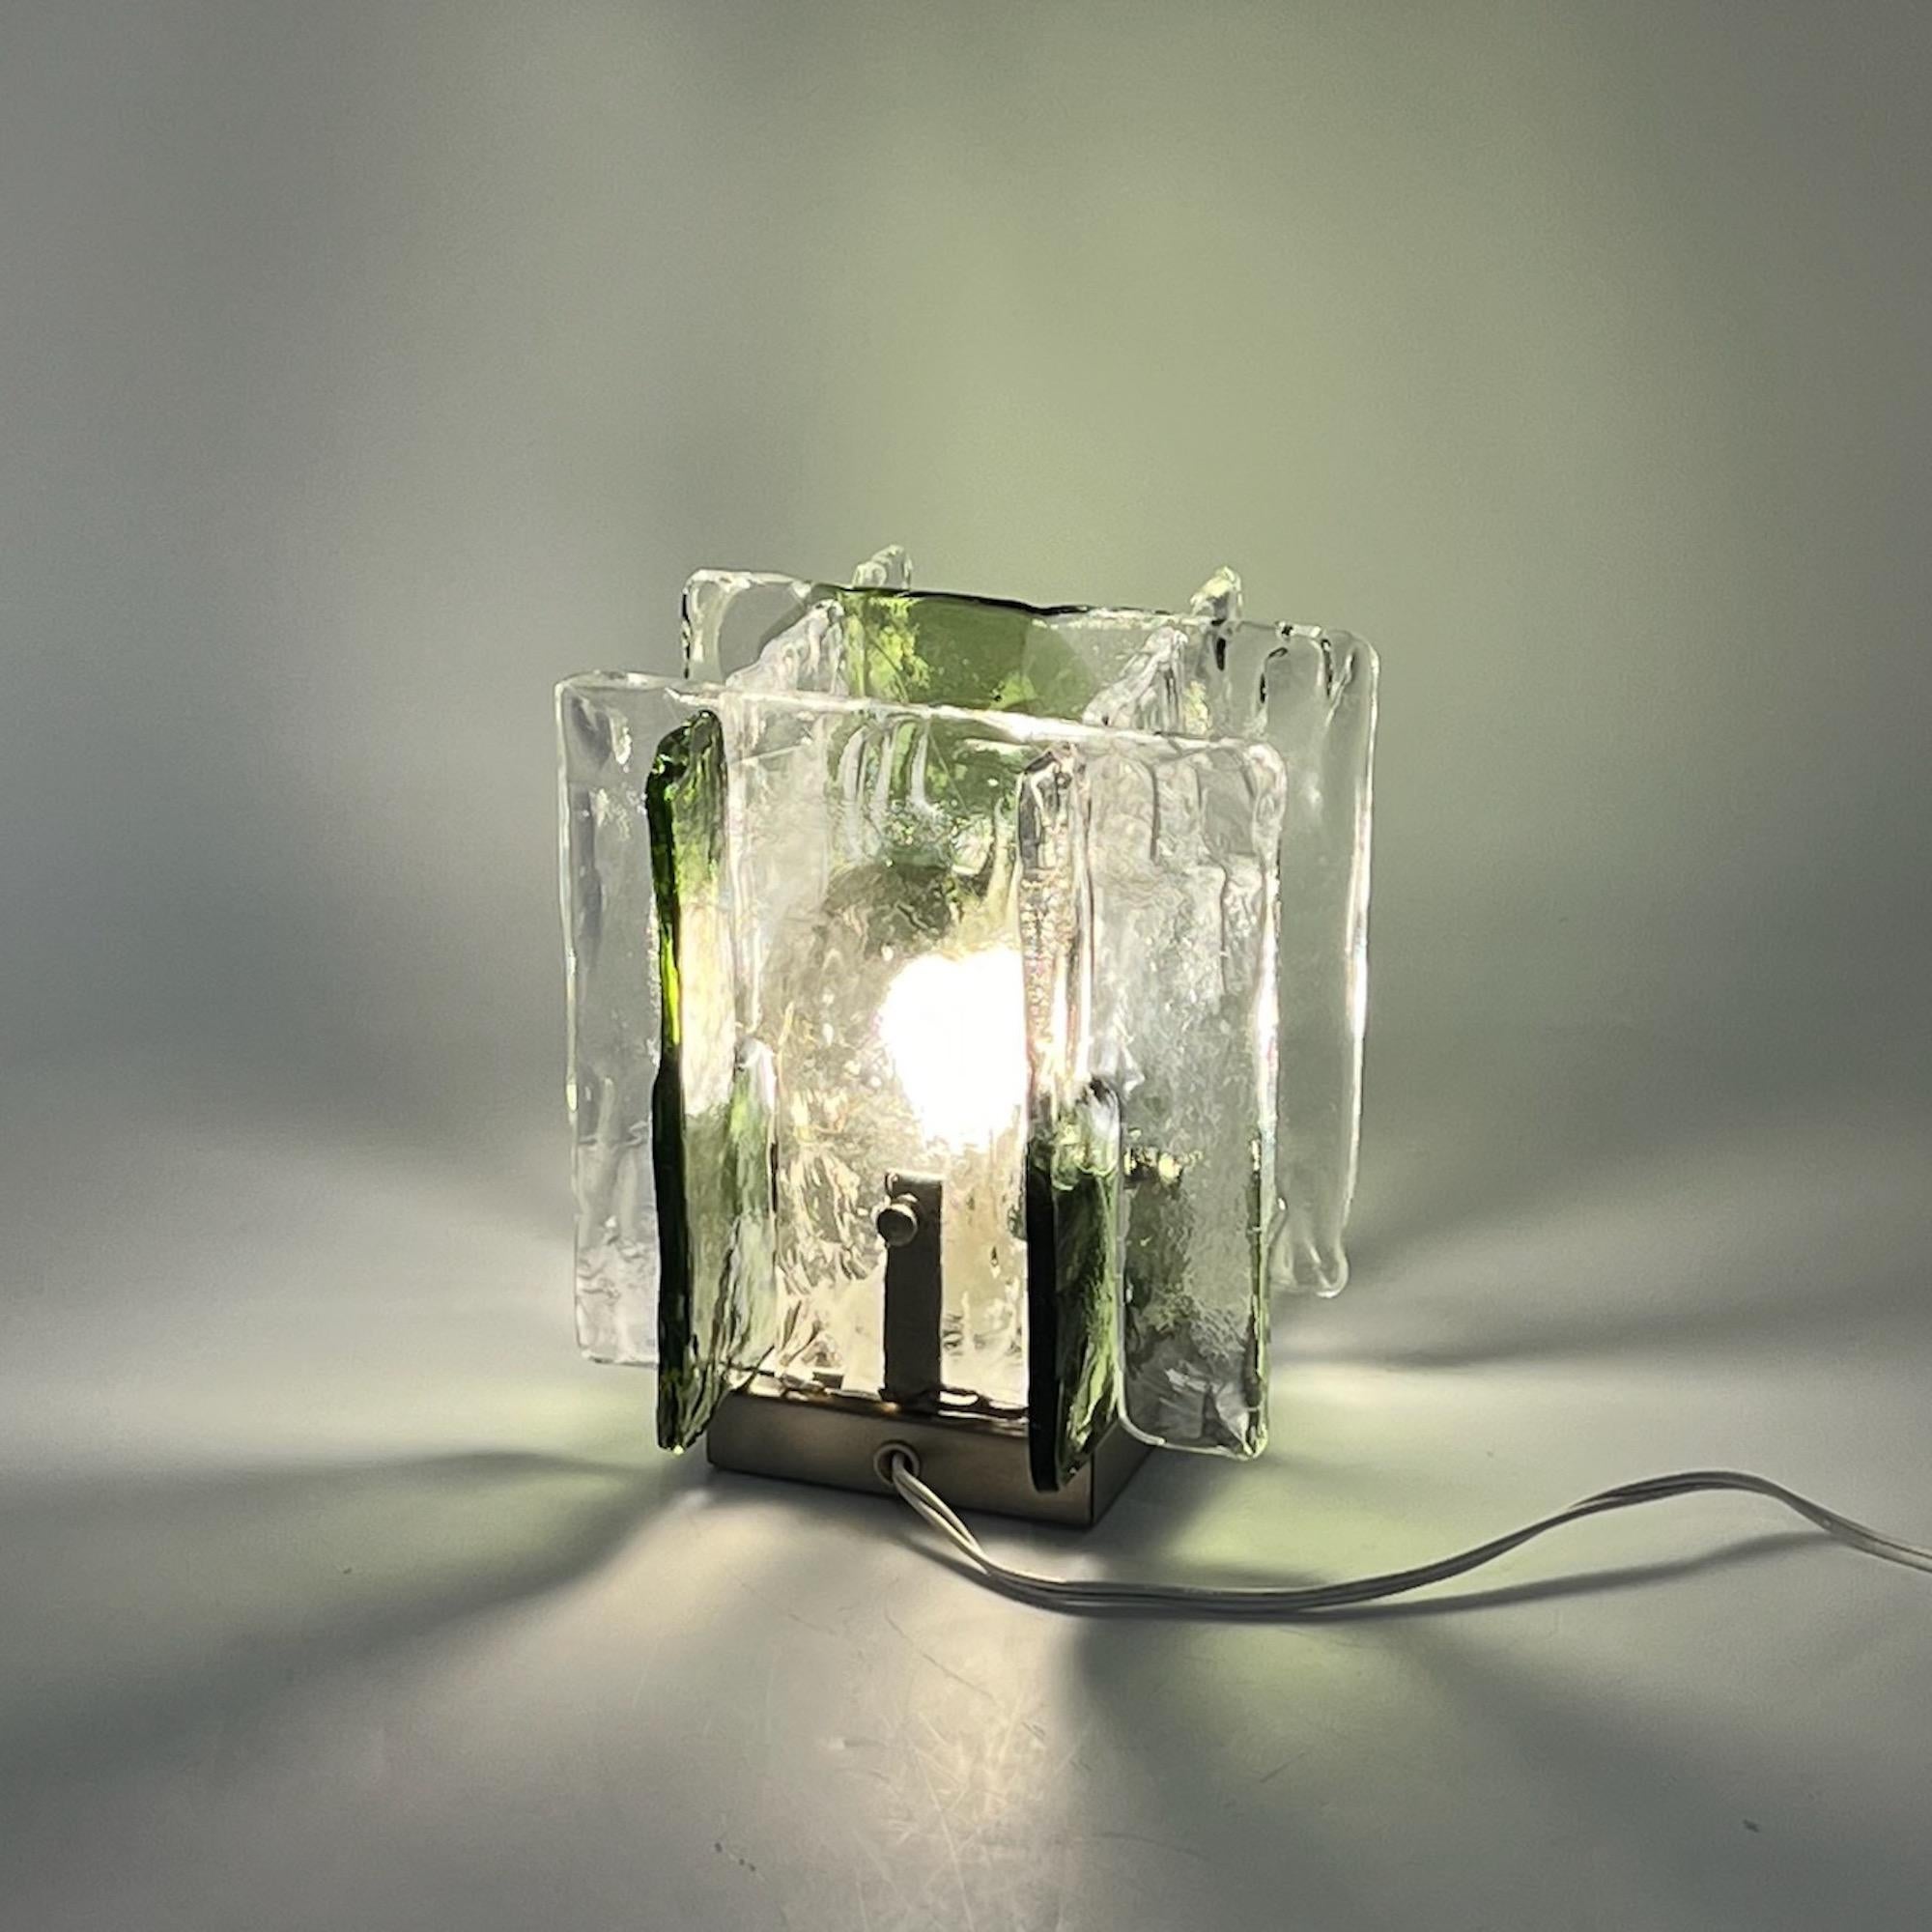 Superb vintage table lamp made of ice frost Murano glass with green and brown hues, crafted by the legendary Vetrerie Mazzega in Italy.

Made by four pieces of heavy and thick ice-like Murano glass, this iconic lamp exudes a vintage allure of